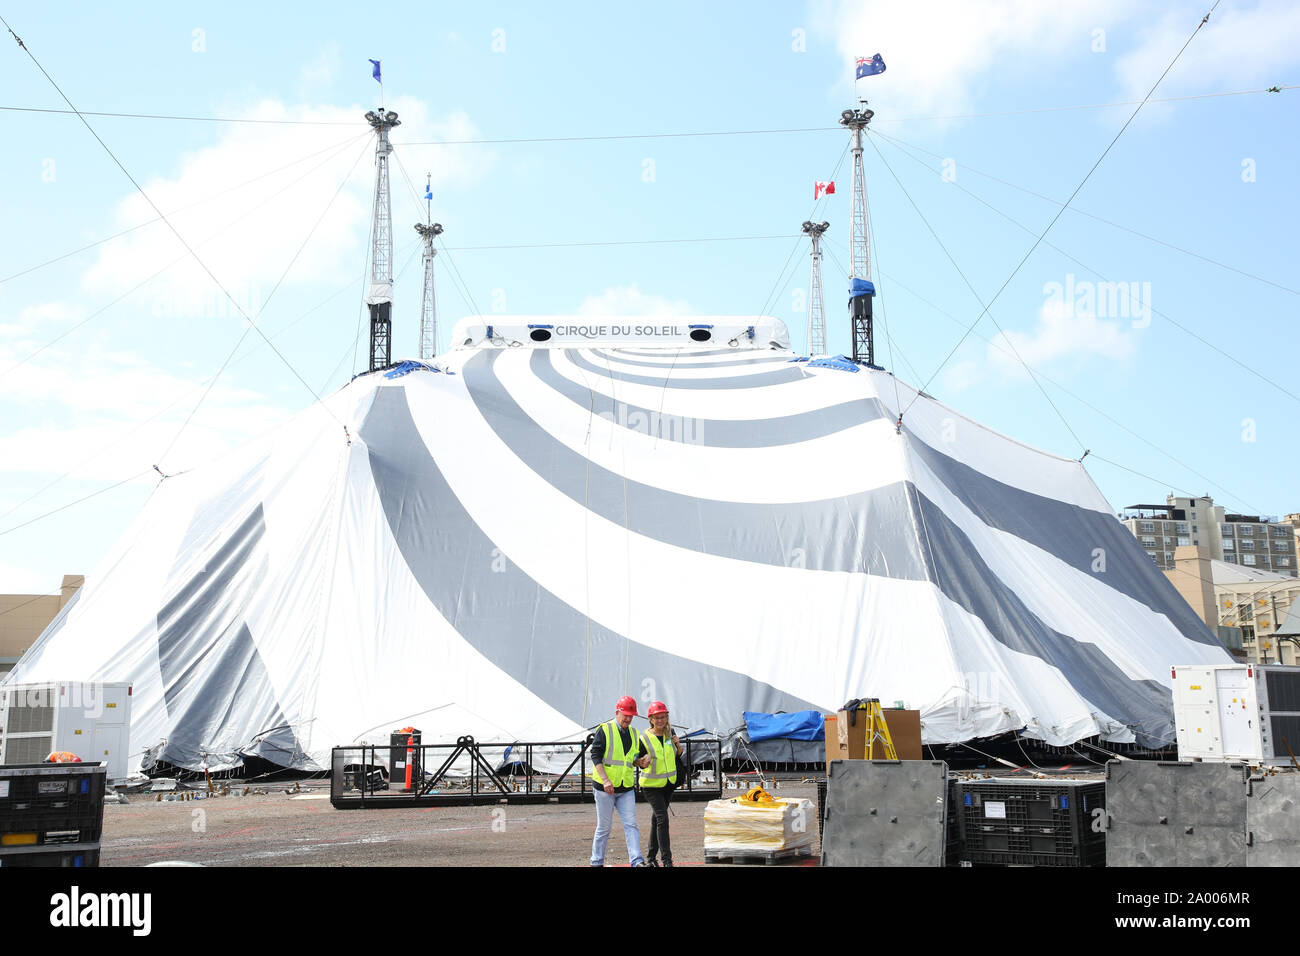 Sydney, Australia. 19th September 2019. Cirque du Soleil’s brand new white and grey Big Top was raised to mark the arrival of KURIOS – Cabinet of Curiosities.  Media photographers and reporters were invited to witness the raising of the Big Top and set-up of the travelling Cirque du Soleil village. Over 60 technicians raised more than 100 metal poles in the final step of building the roof of the “grand chapiteau”. The Big Top stands about 20 metres (56 feet) high and is 51 metres (164 feet) in diameter. Credit: Richard Milnes/Alamy Live News Stock Photo